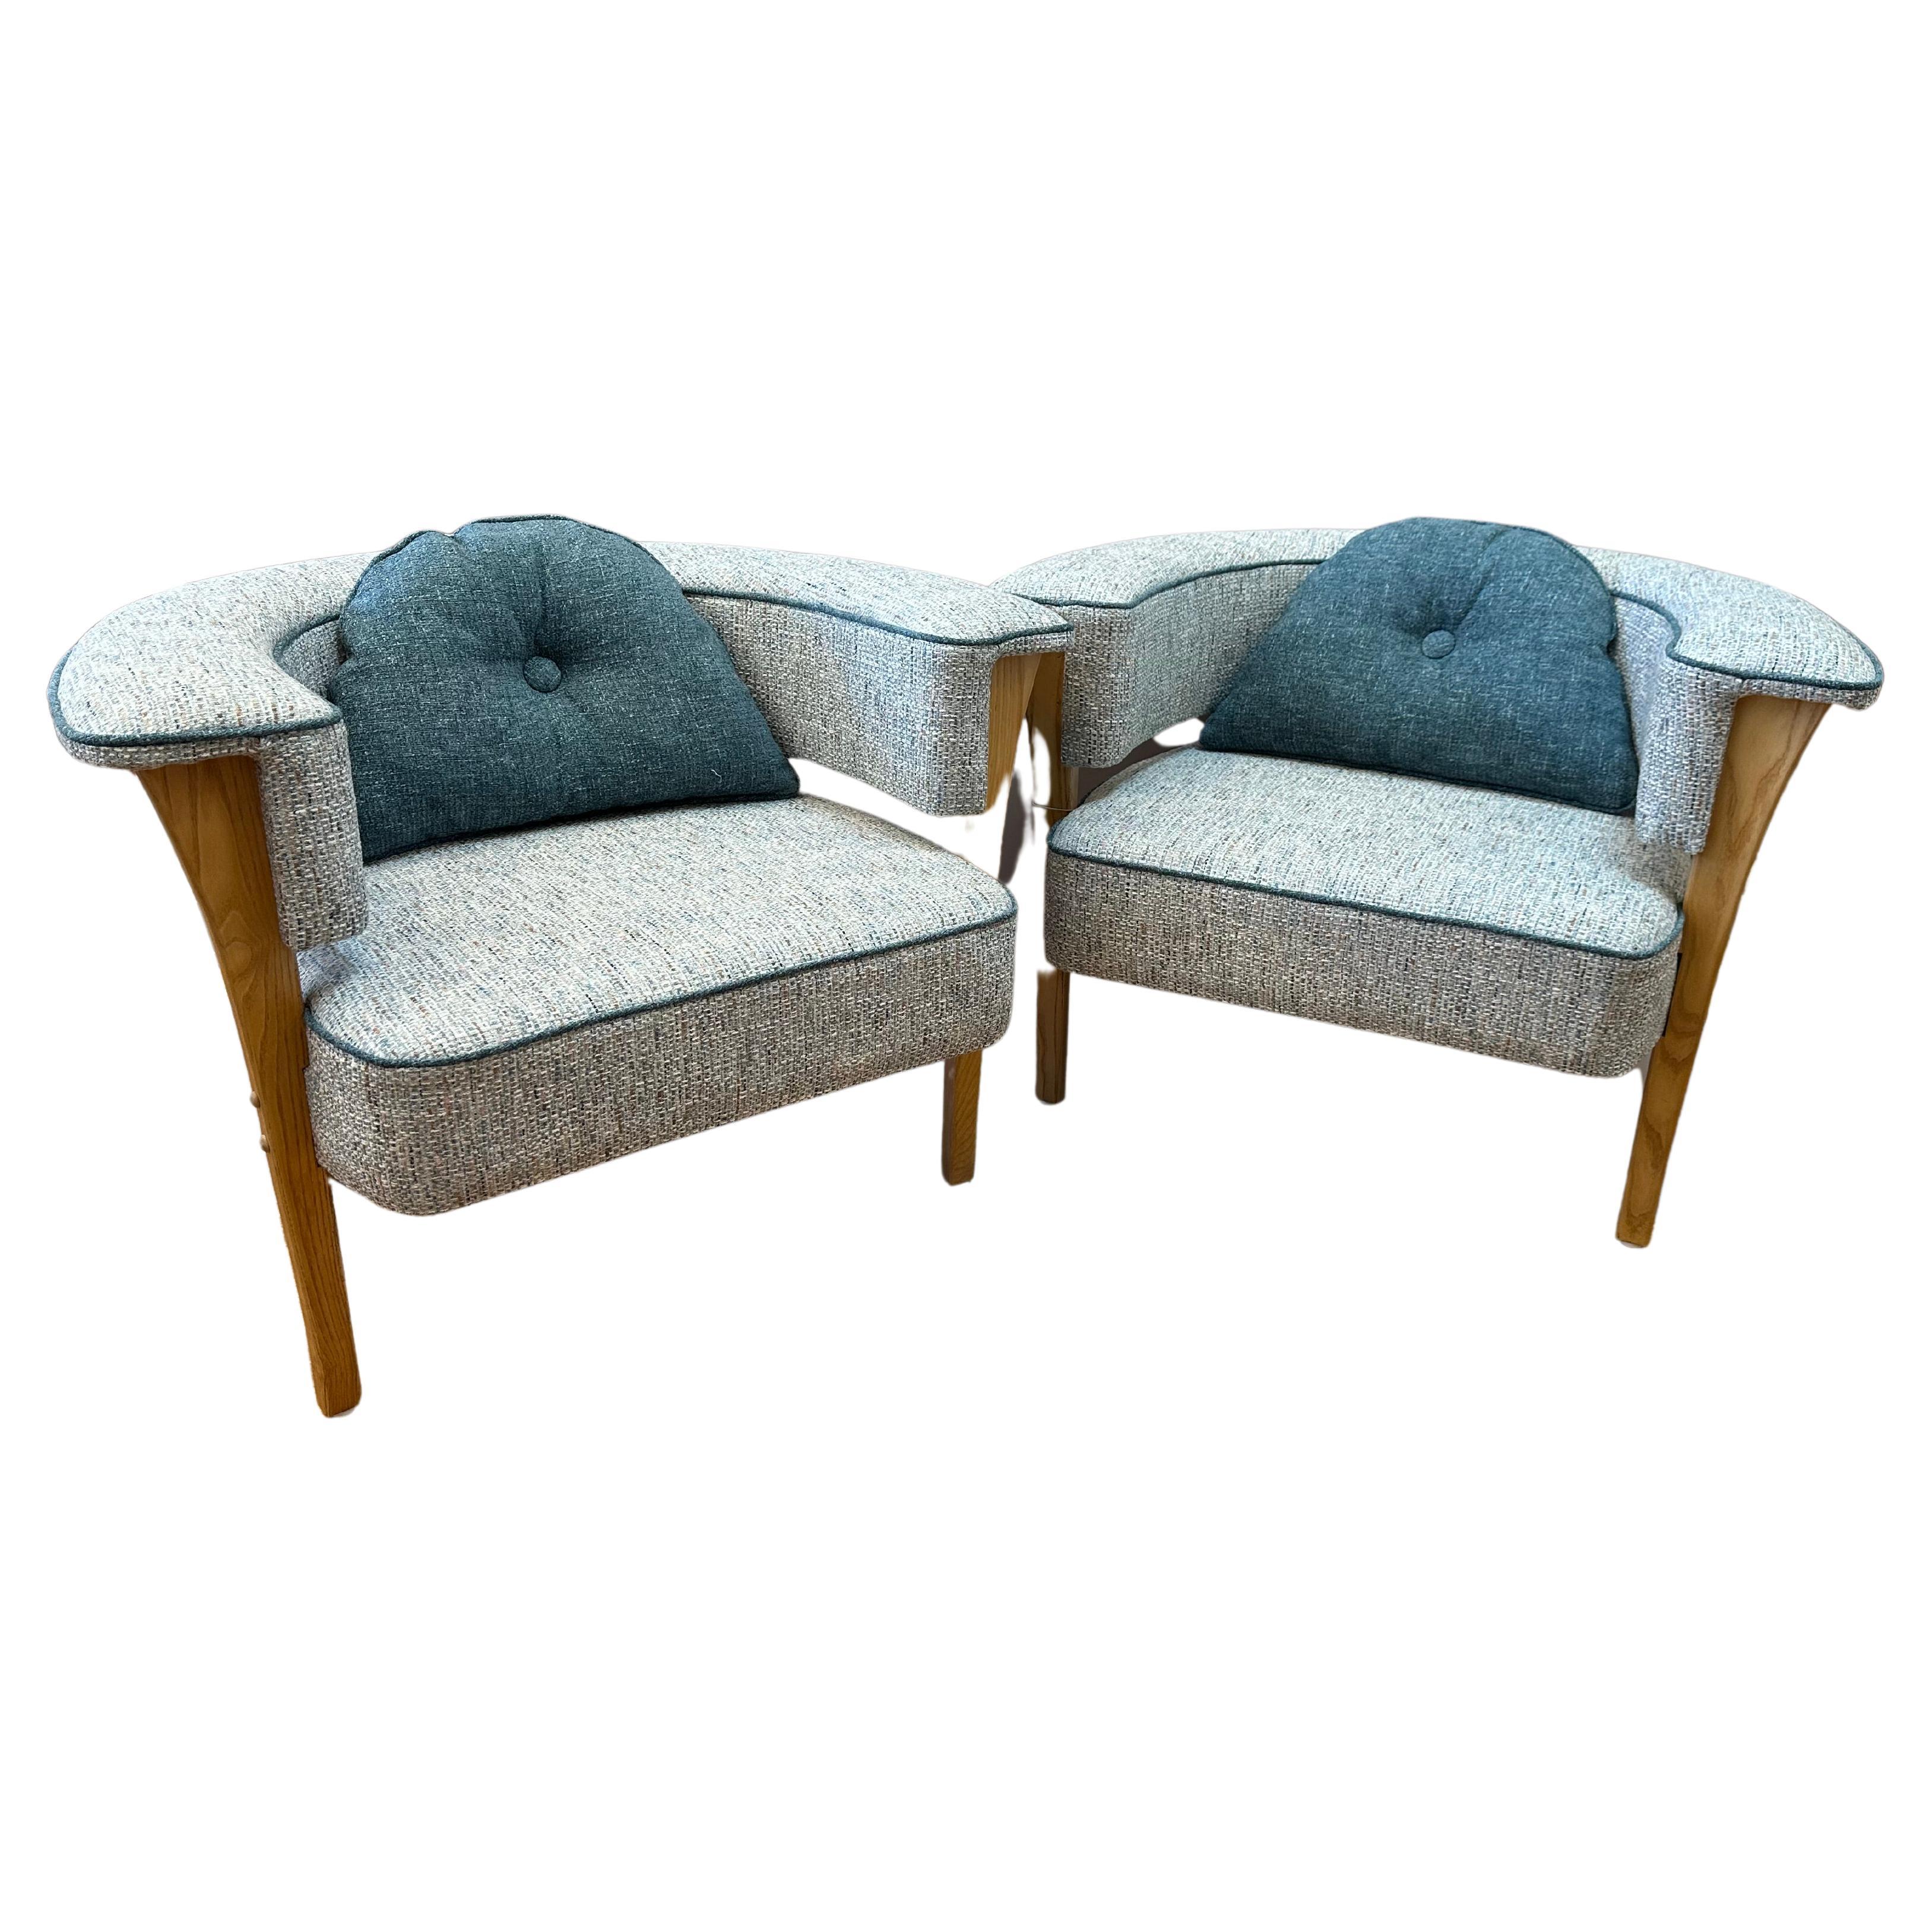 Unusual Pair of Mid Century Style Modern Arm Chairs For Sale